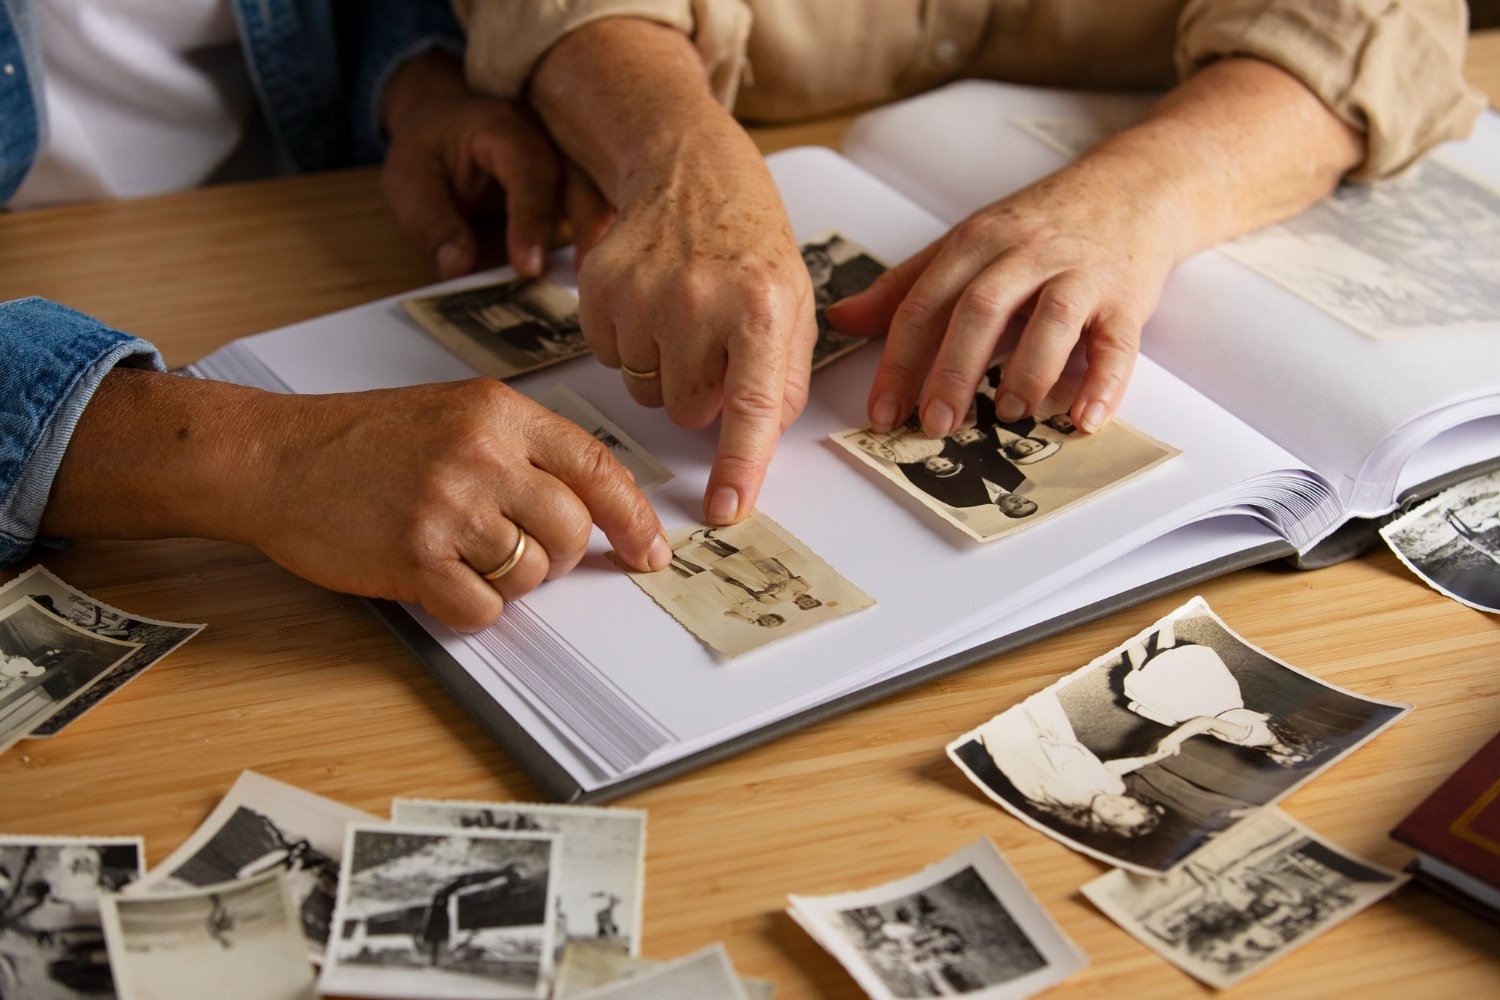 Trace Your Ancestry With findmypast’s Genealogy Research Tools